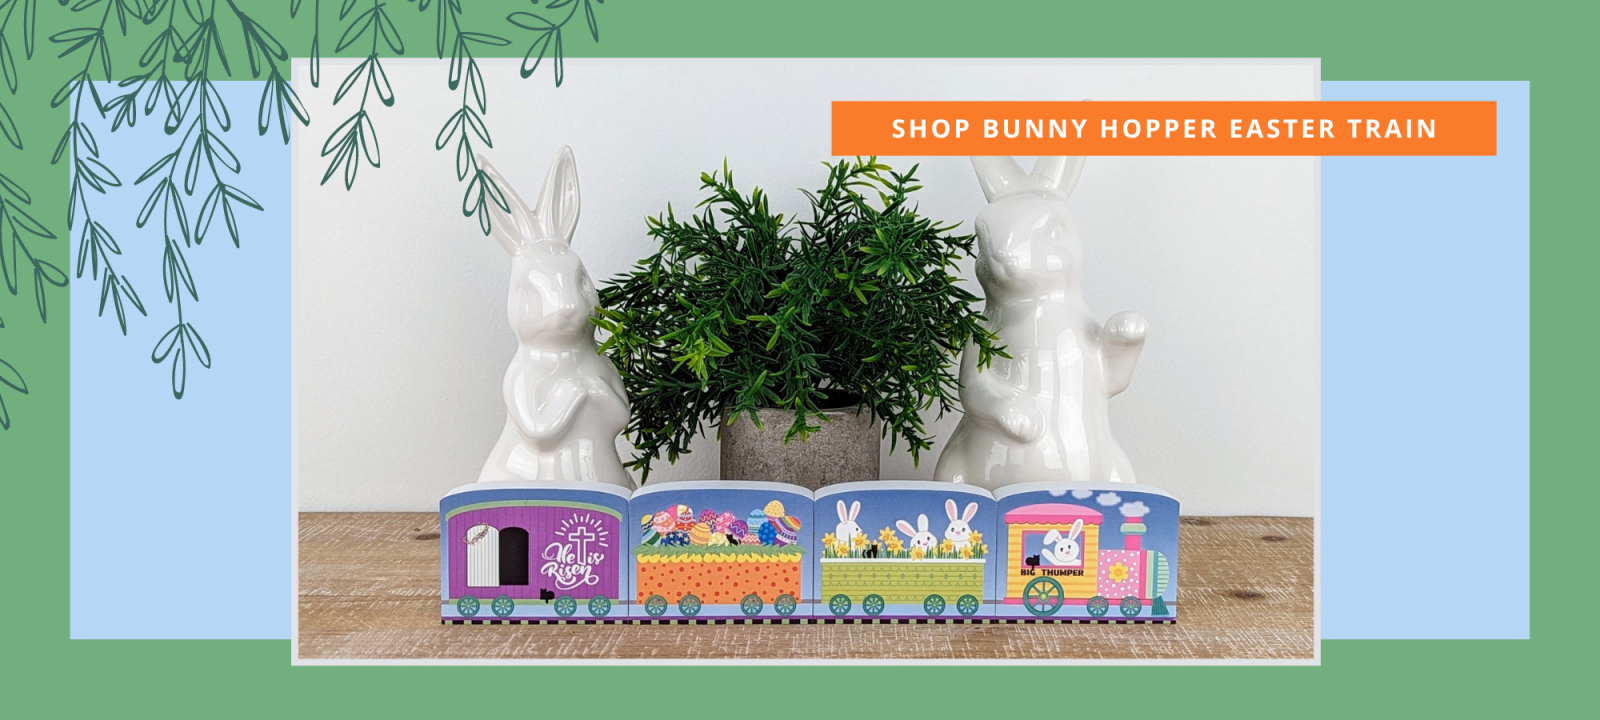 Add our Bunny Hopper Train to your Easter decor. Handcrafted by The Cat's Meow Village in Ohio.